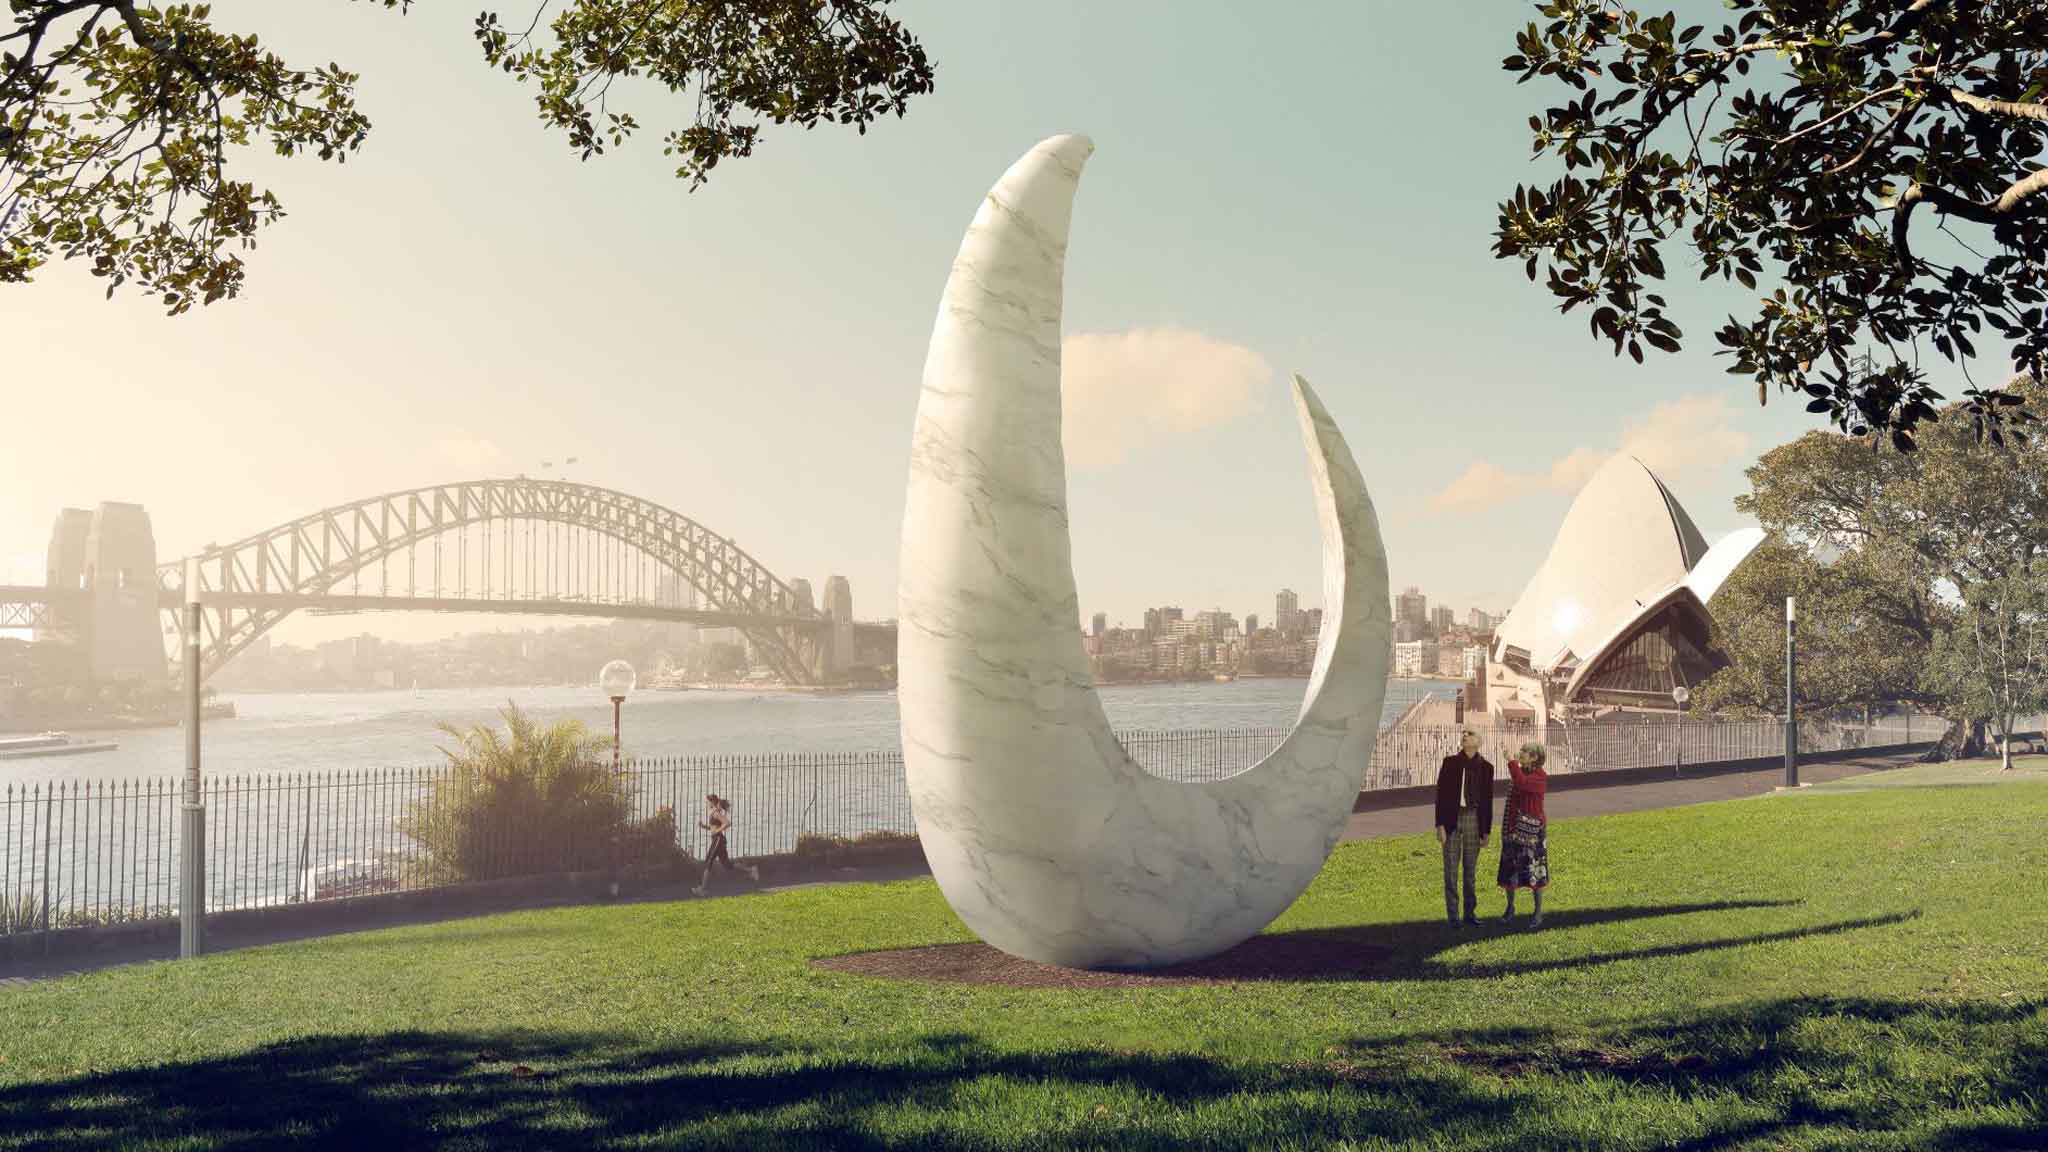 Large white sculpture on a green lawn in a park being viewed by two people. In the background is a harbour, bridge and city buildings.